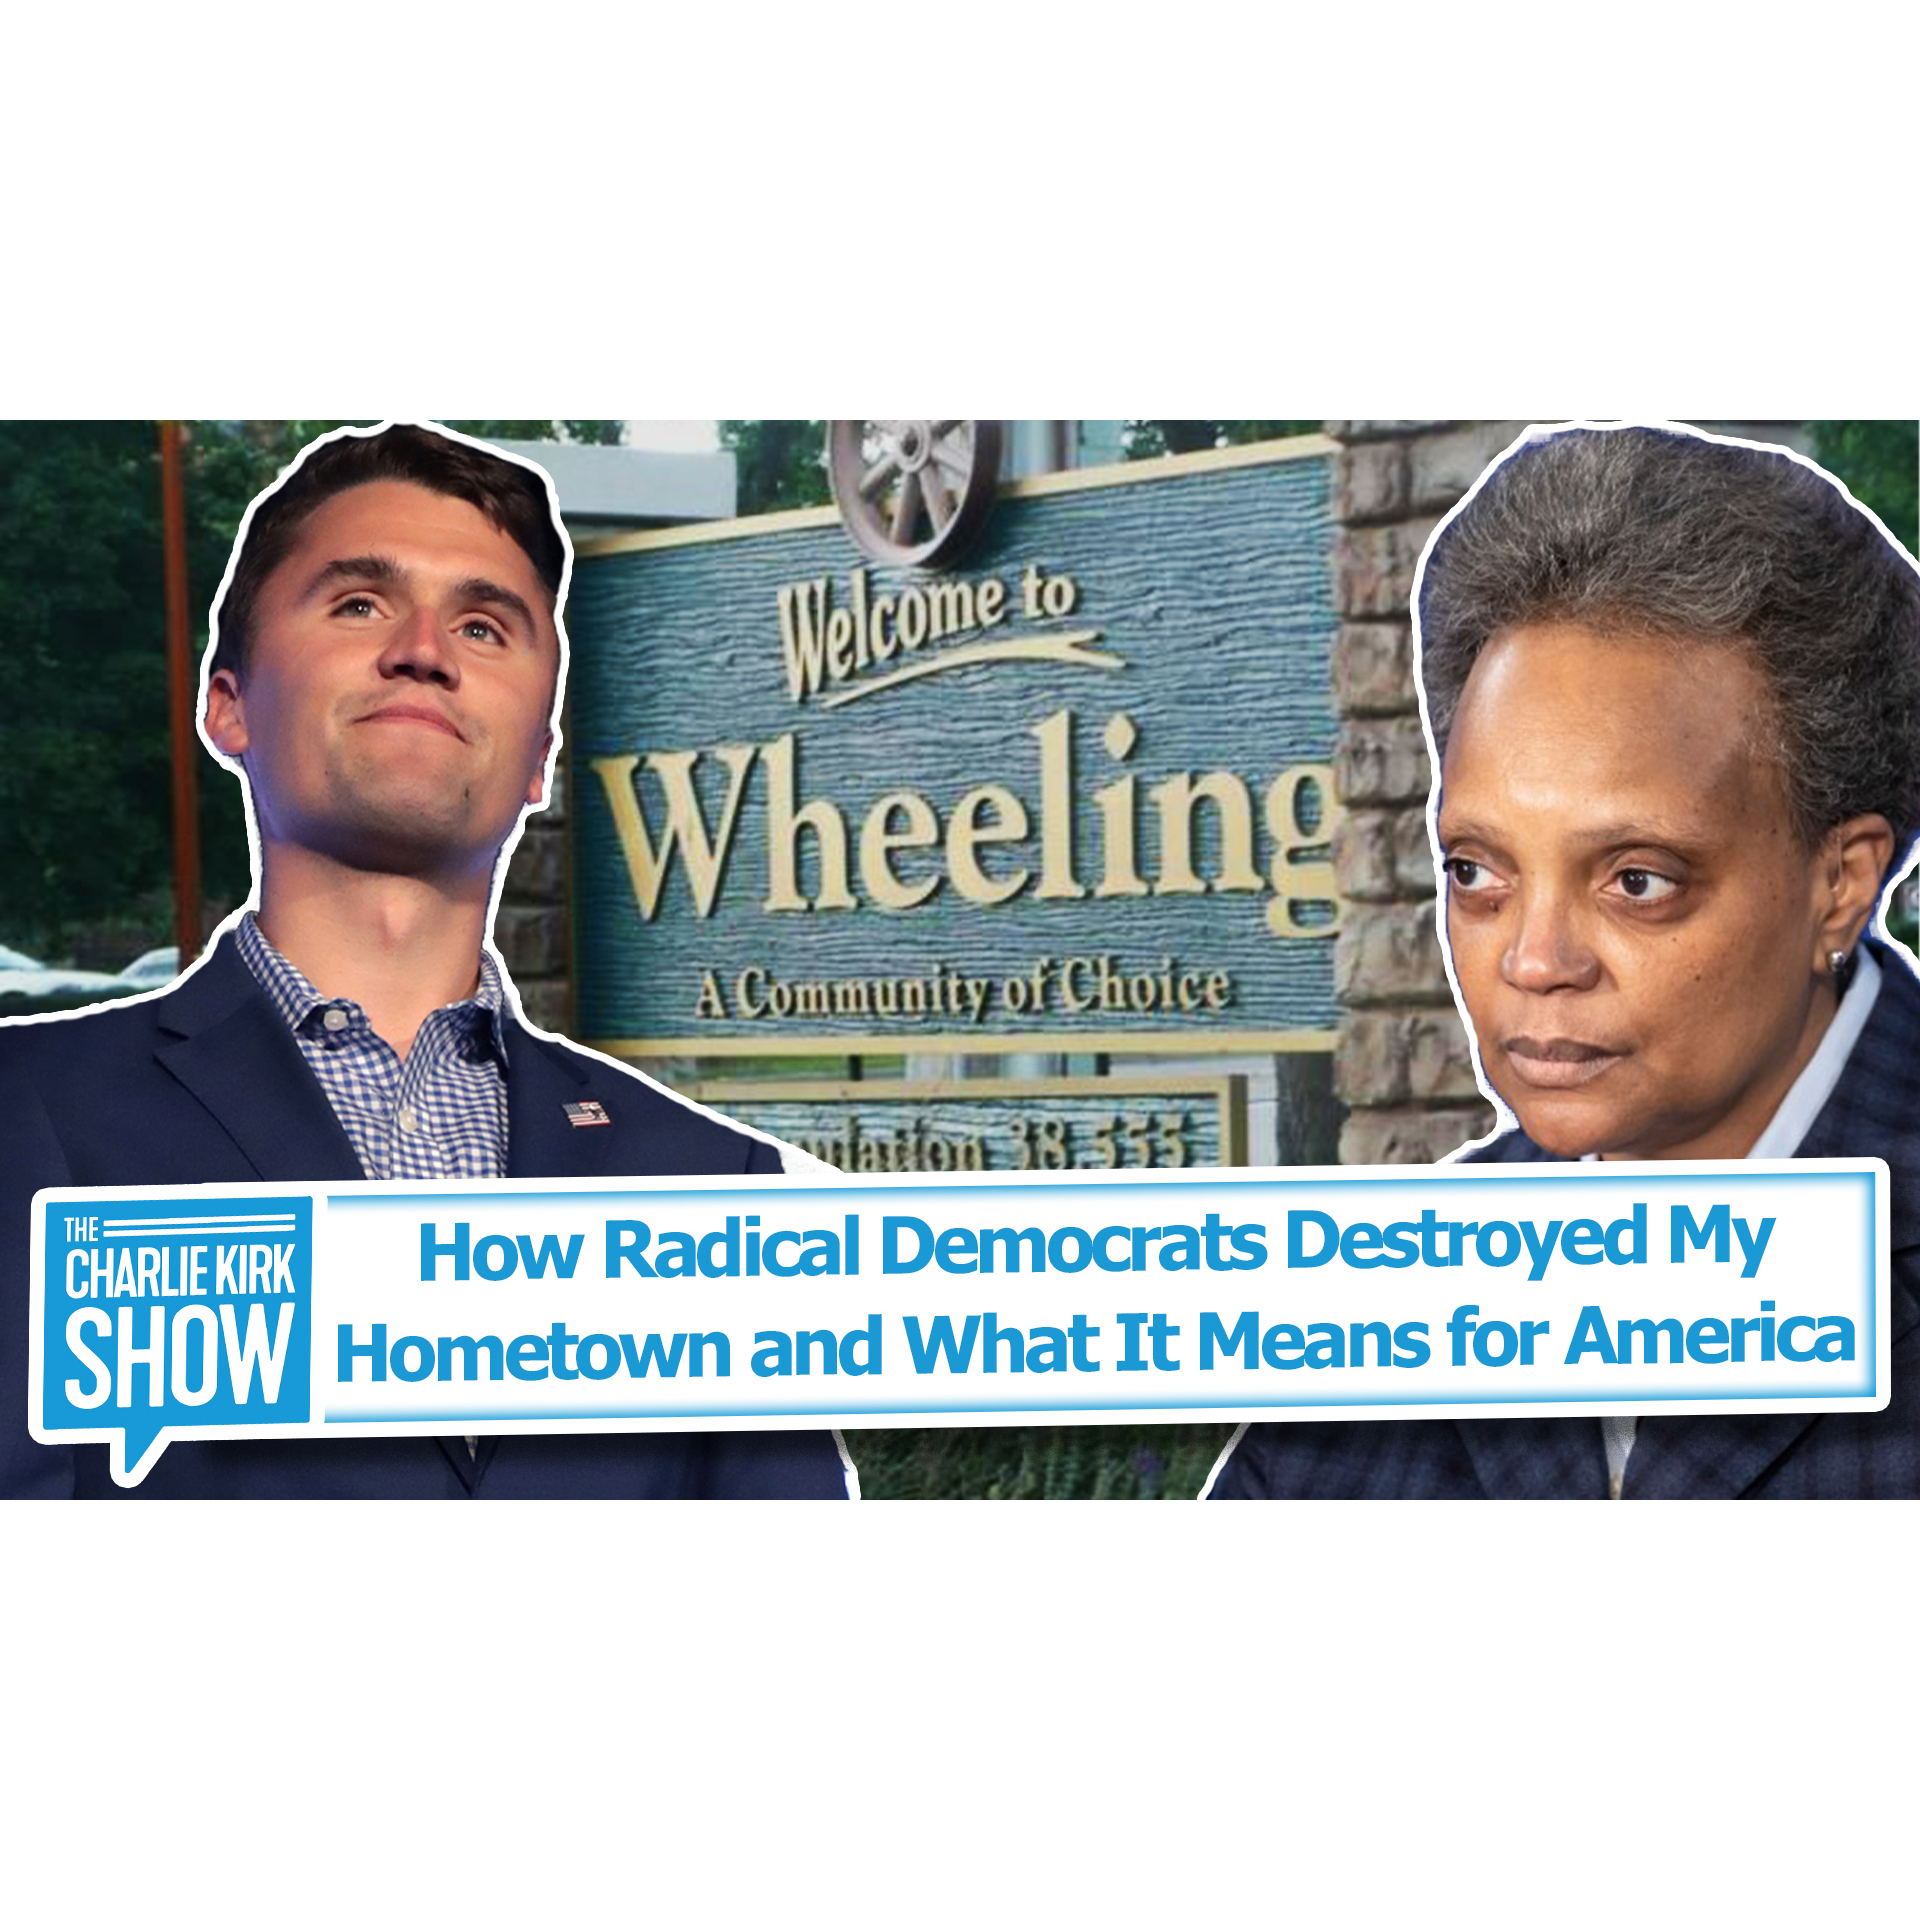 How Radical Democrats Destroyed My Hometown and What It Means for America